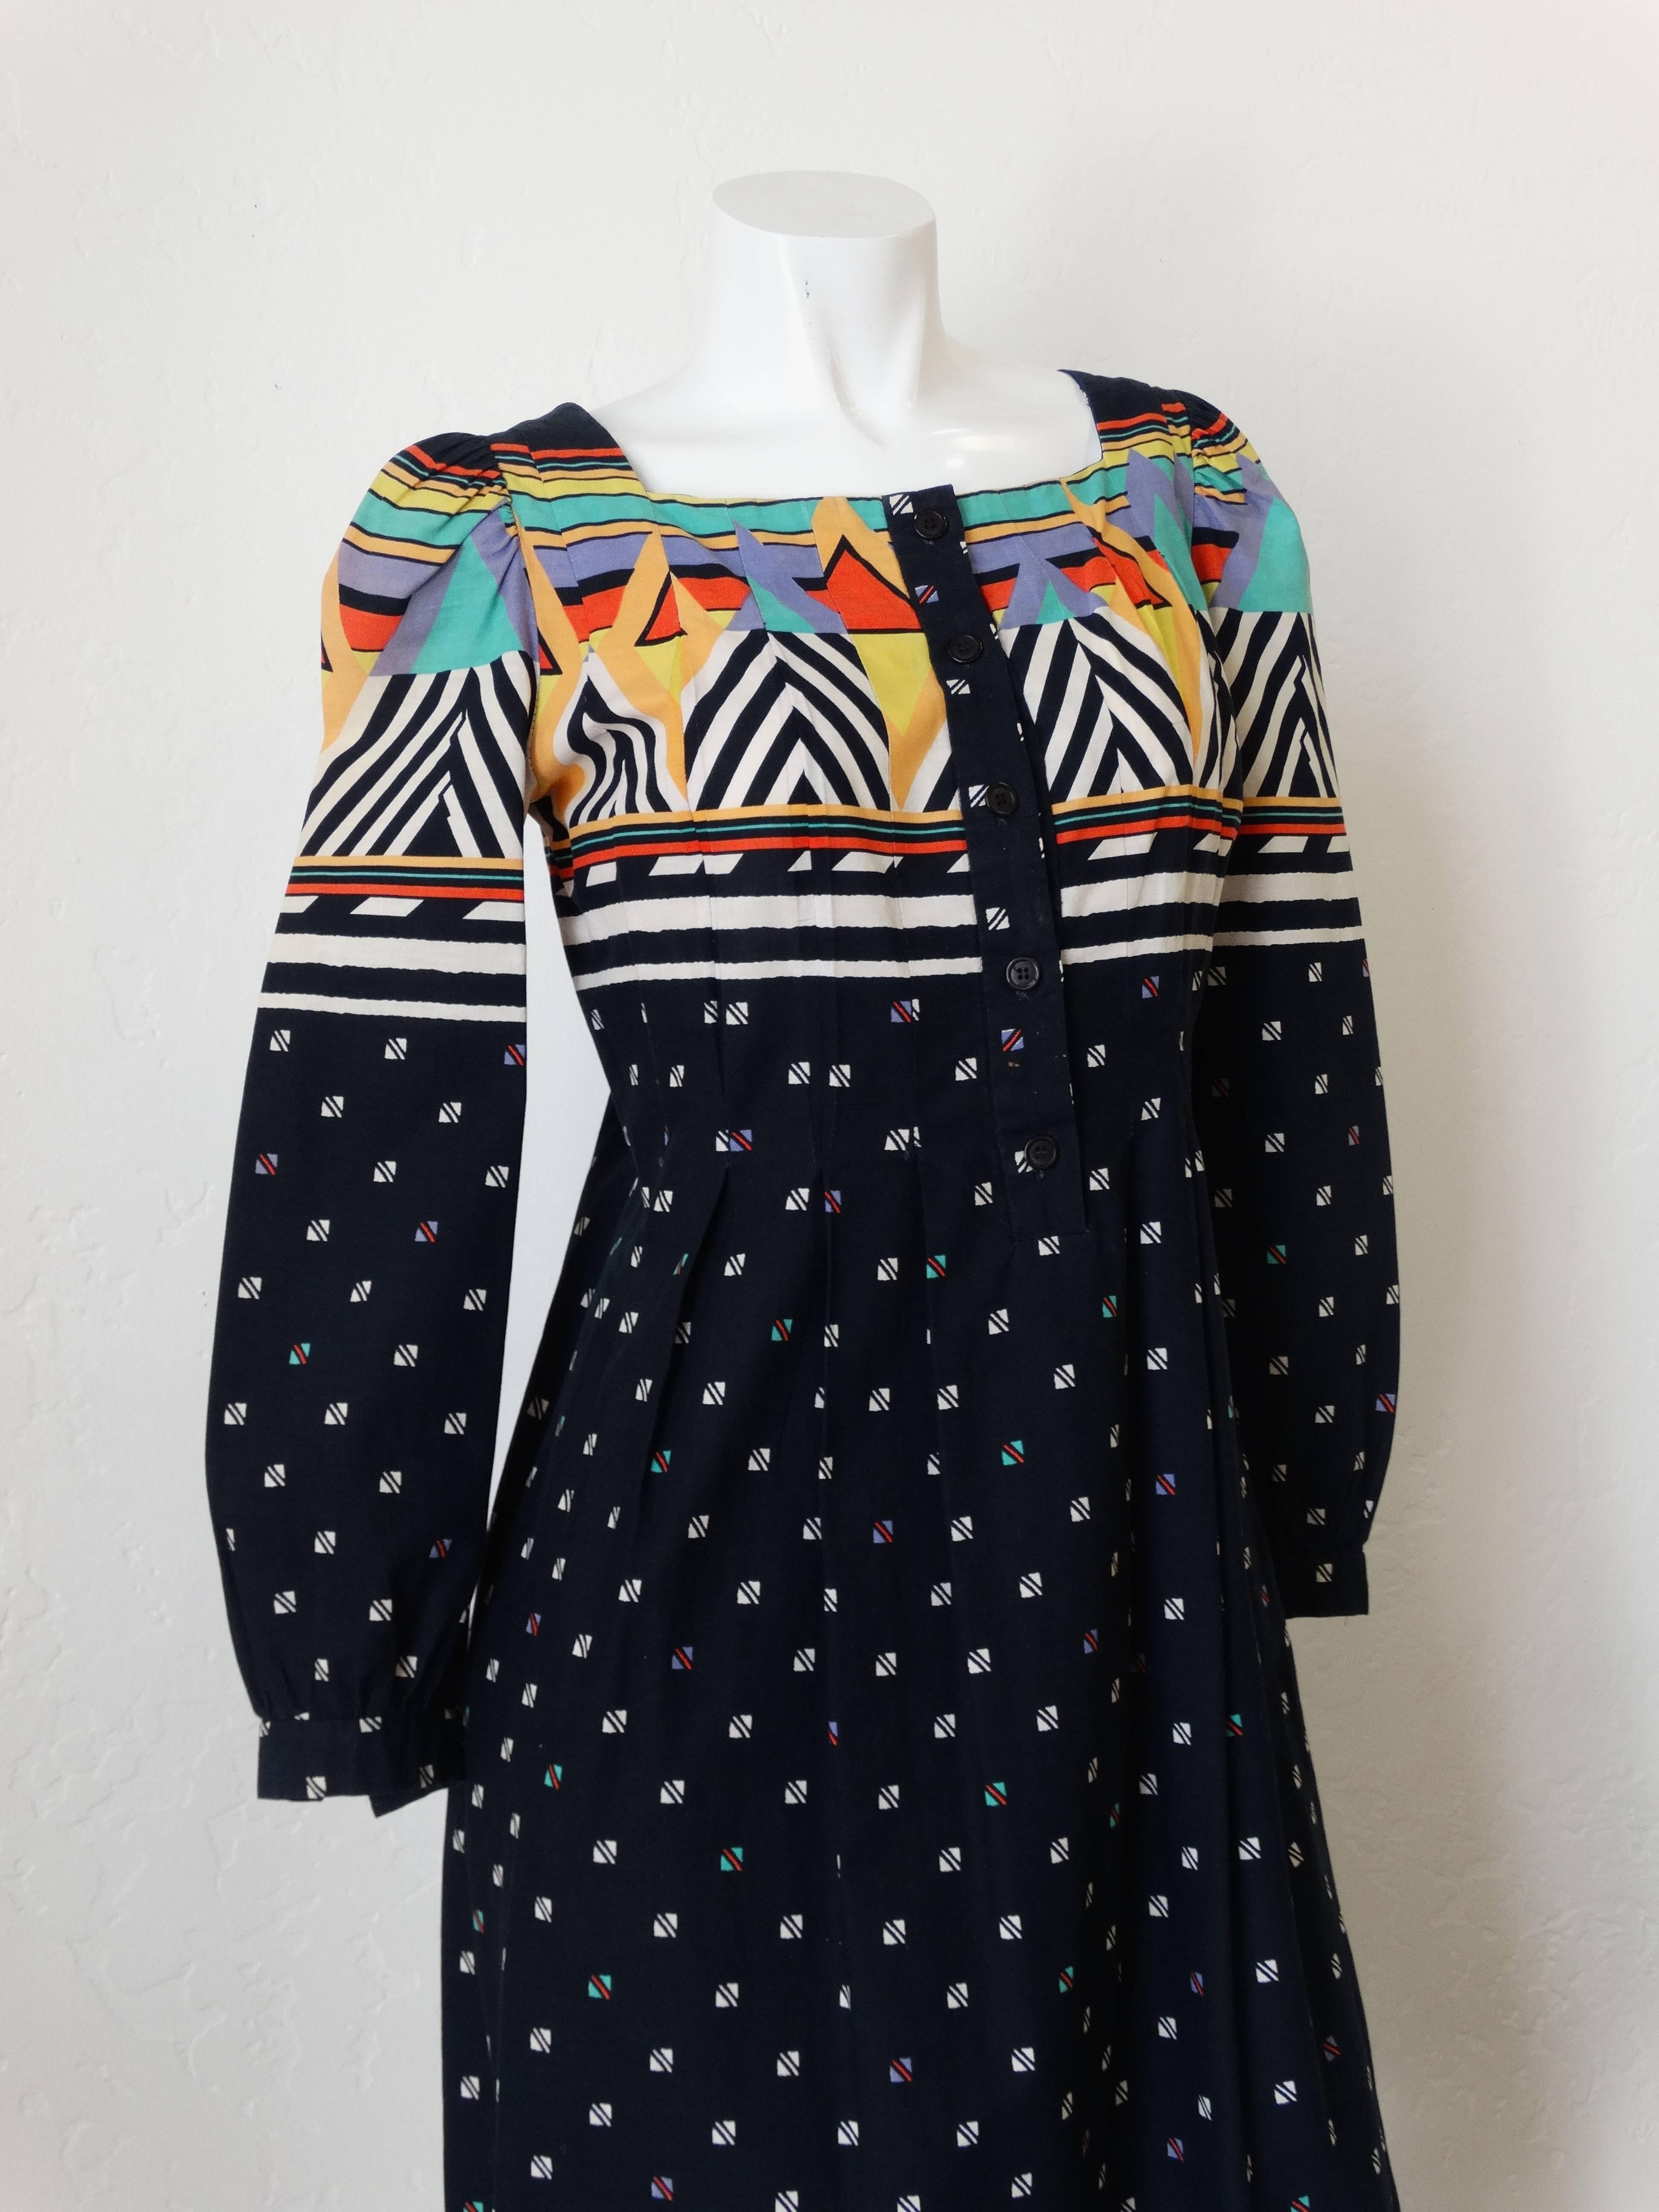 Beautiful 1980's “California Girl” Geometric Print Dress. Black and white triangle print. Pin-tuck style stitching at the bust. Button up bodice. Contrasting blocked prints with multicolored stripes and chevrons. Vibrant colors, dress is cotton.